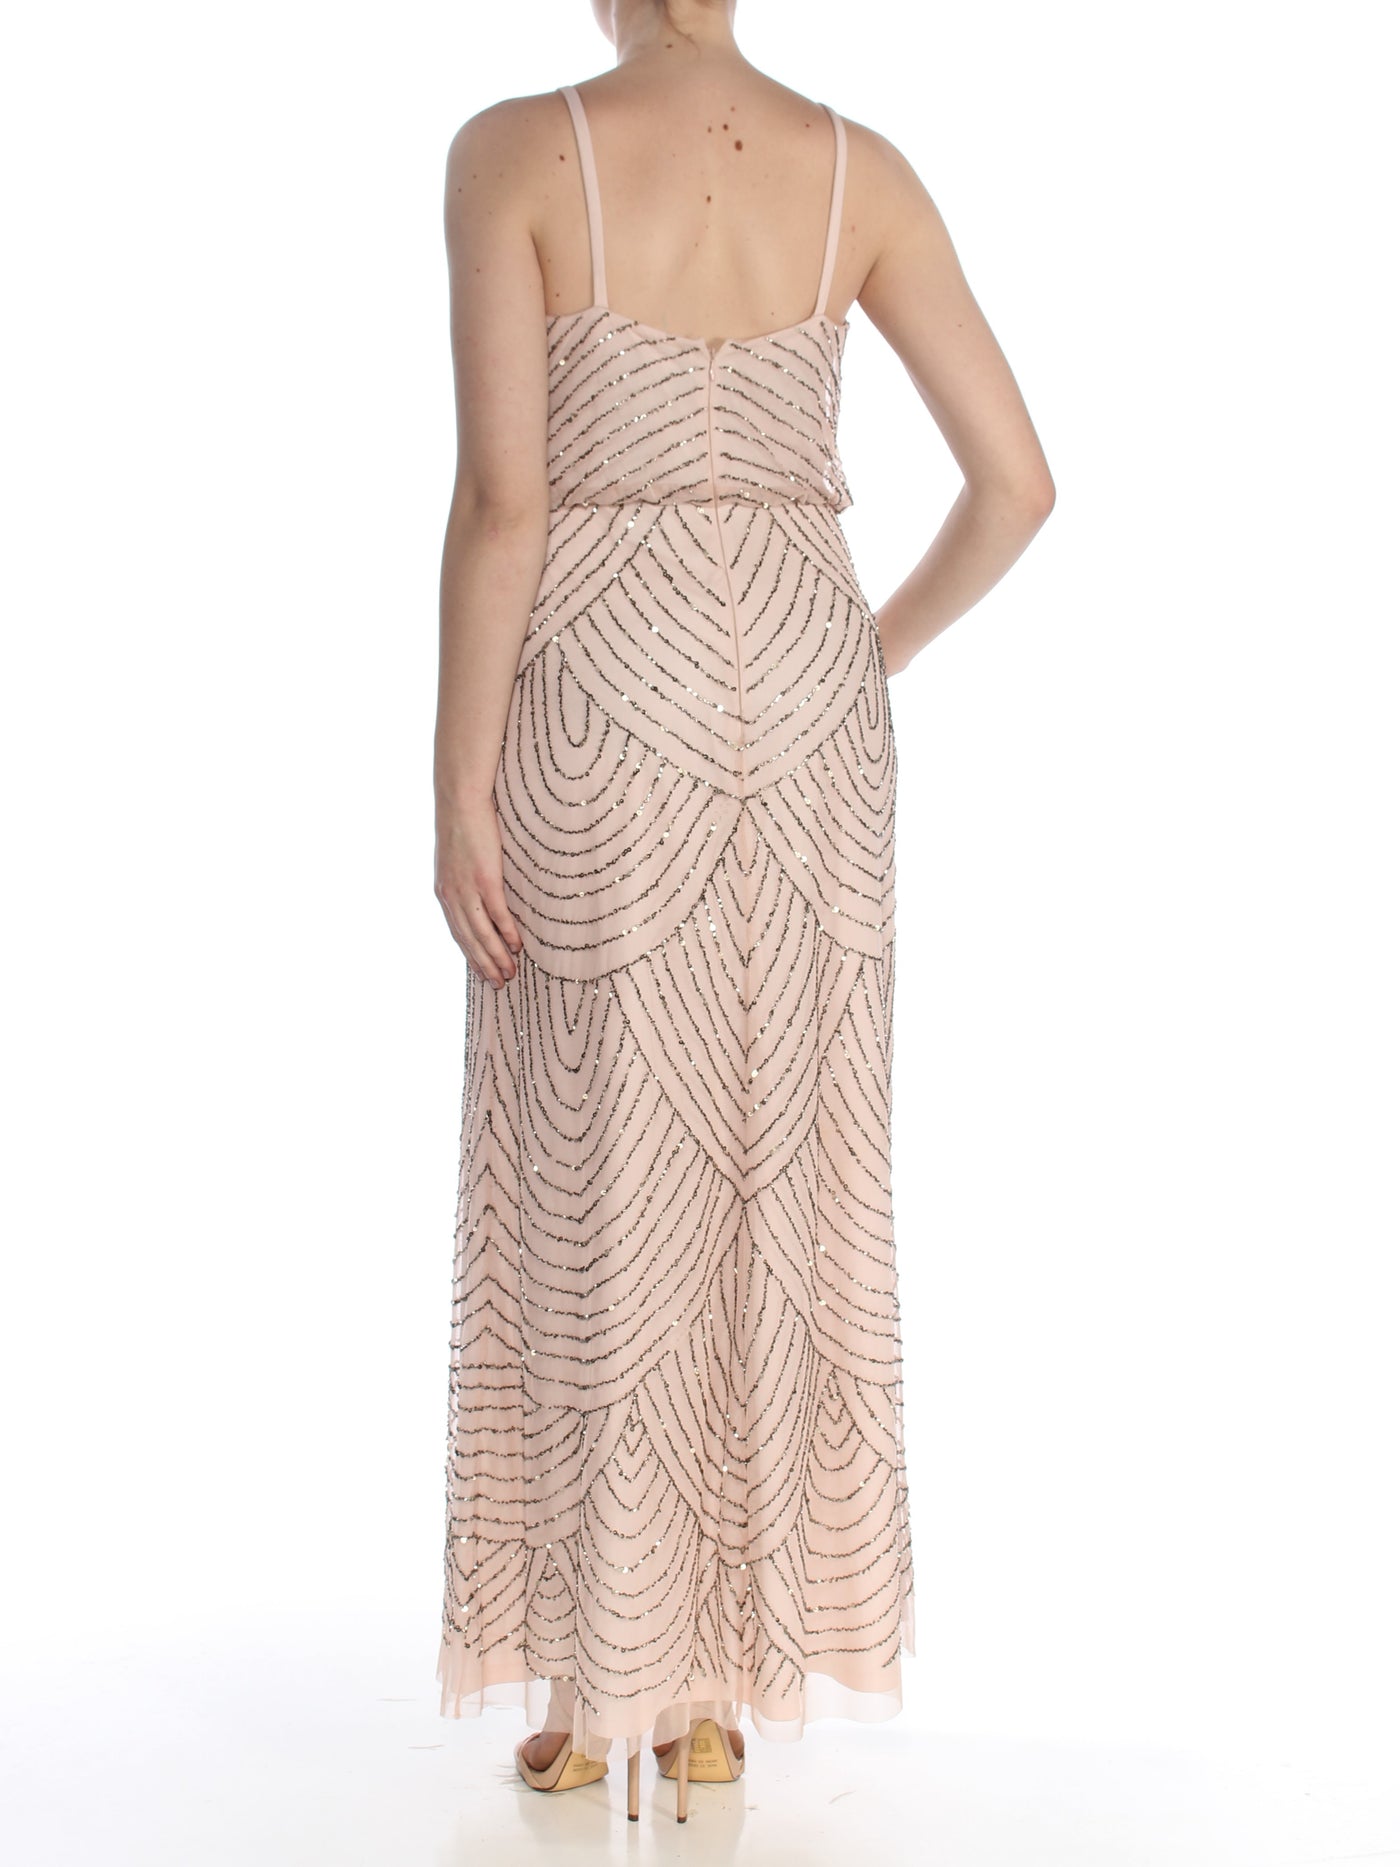 ADRIANNA PAPELL Womens Beige Beaded Gown Printed Spaghetti Strap Scoop Neck Full-Length Evening Blouson Dress